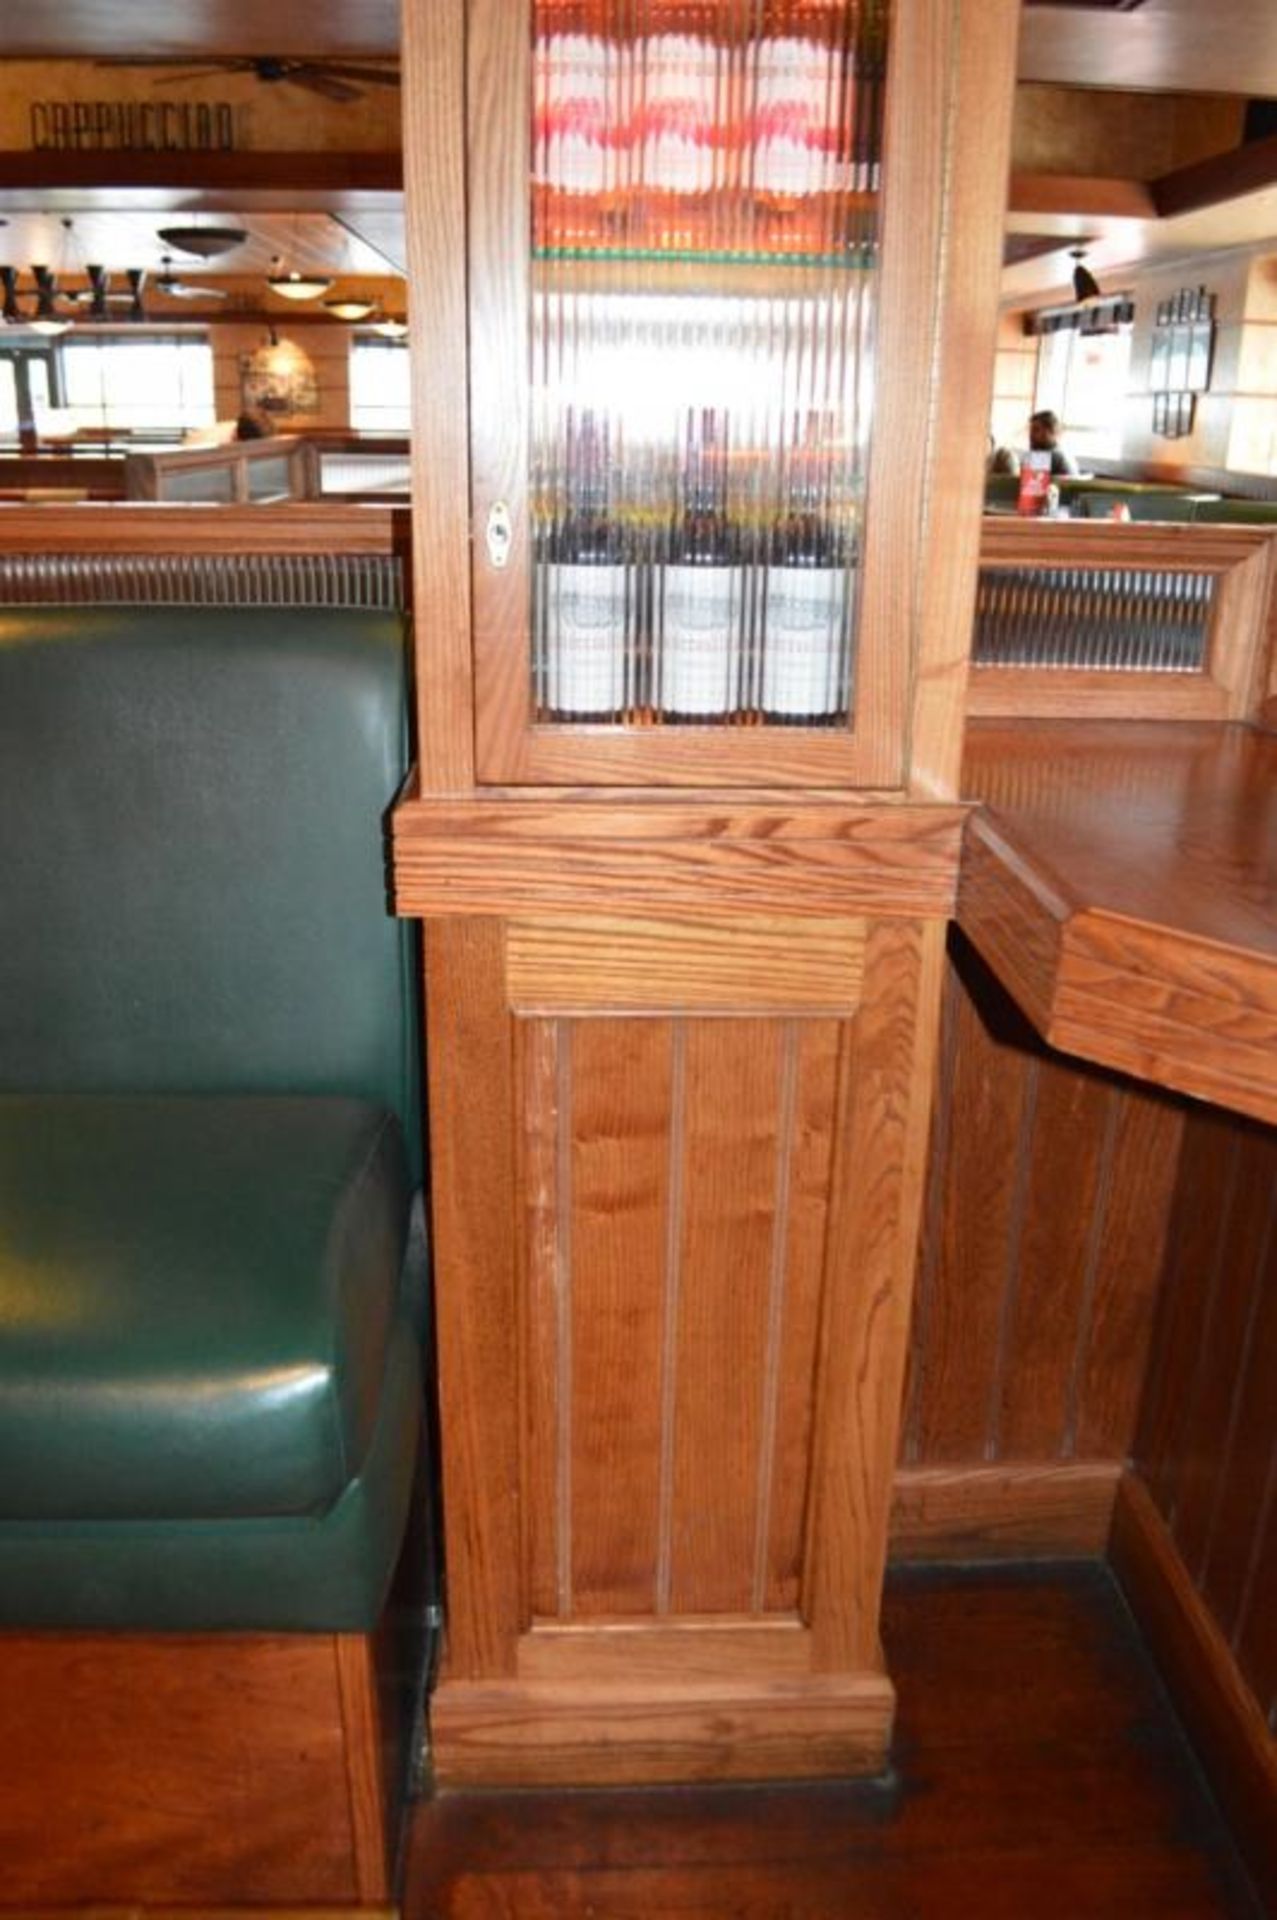 1 x Bar Restaurant Room Partition With Seating Bench, Pillar, Wine Cabinet and Foot Rest - Overall S - Image 4 of 21